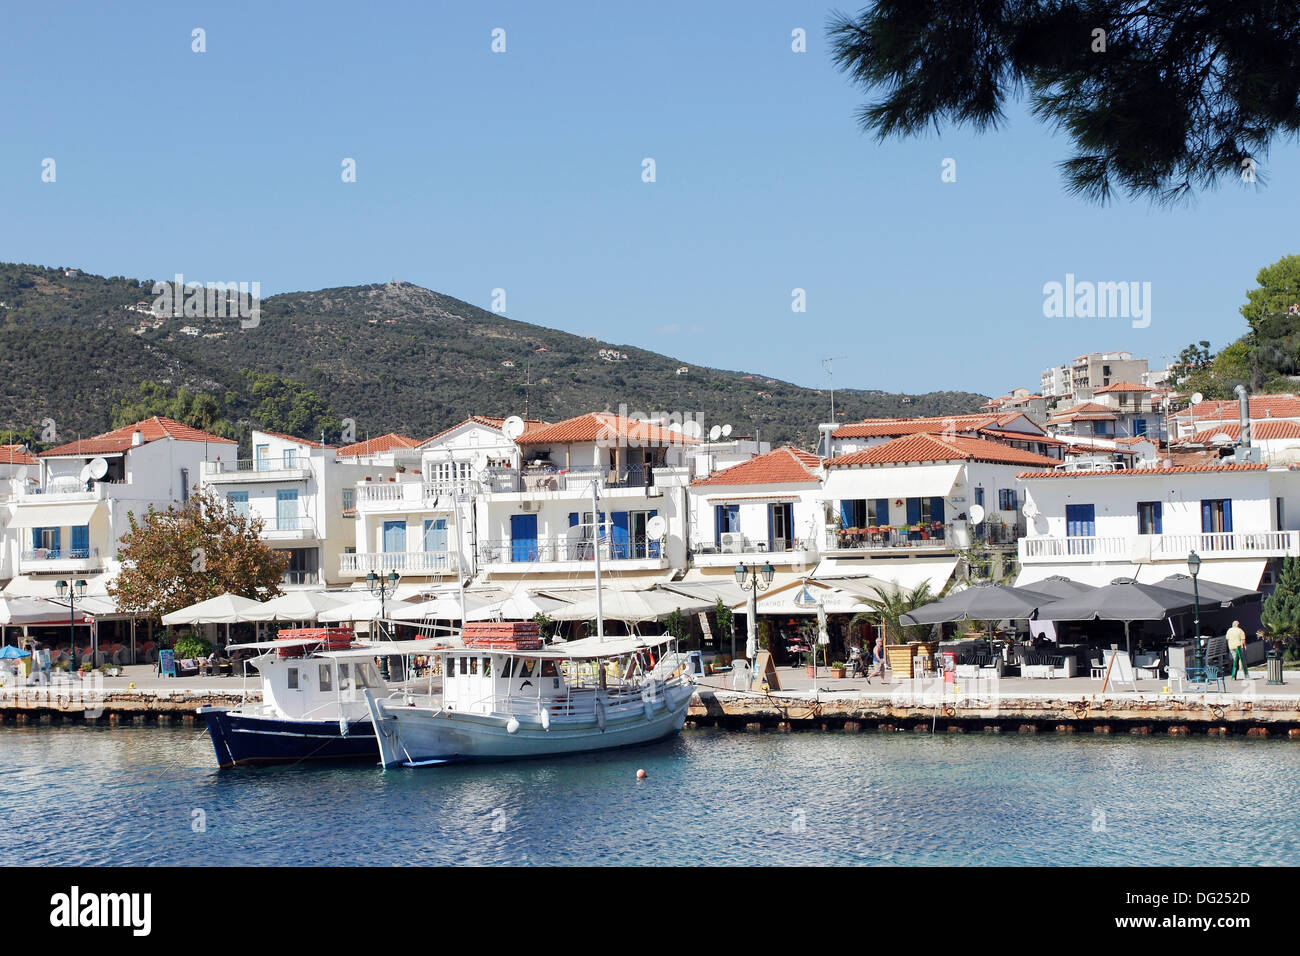 Boats moored in the old harbor in Skiathos Town on the Greek Island of Skiathos, a popular tourist destination in the Aegean. Stock Photo